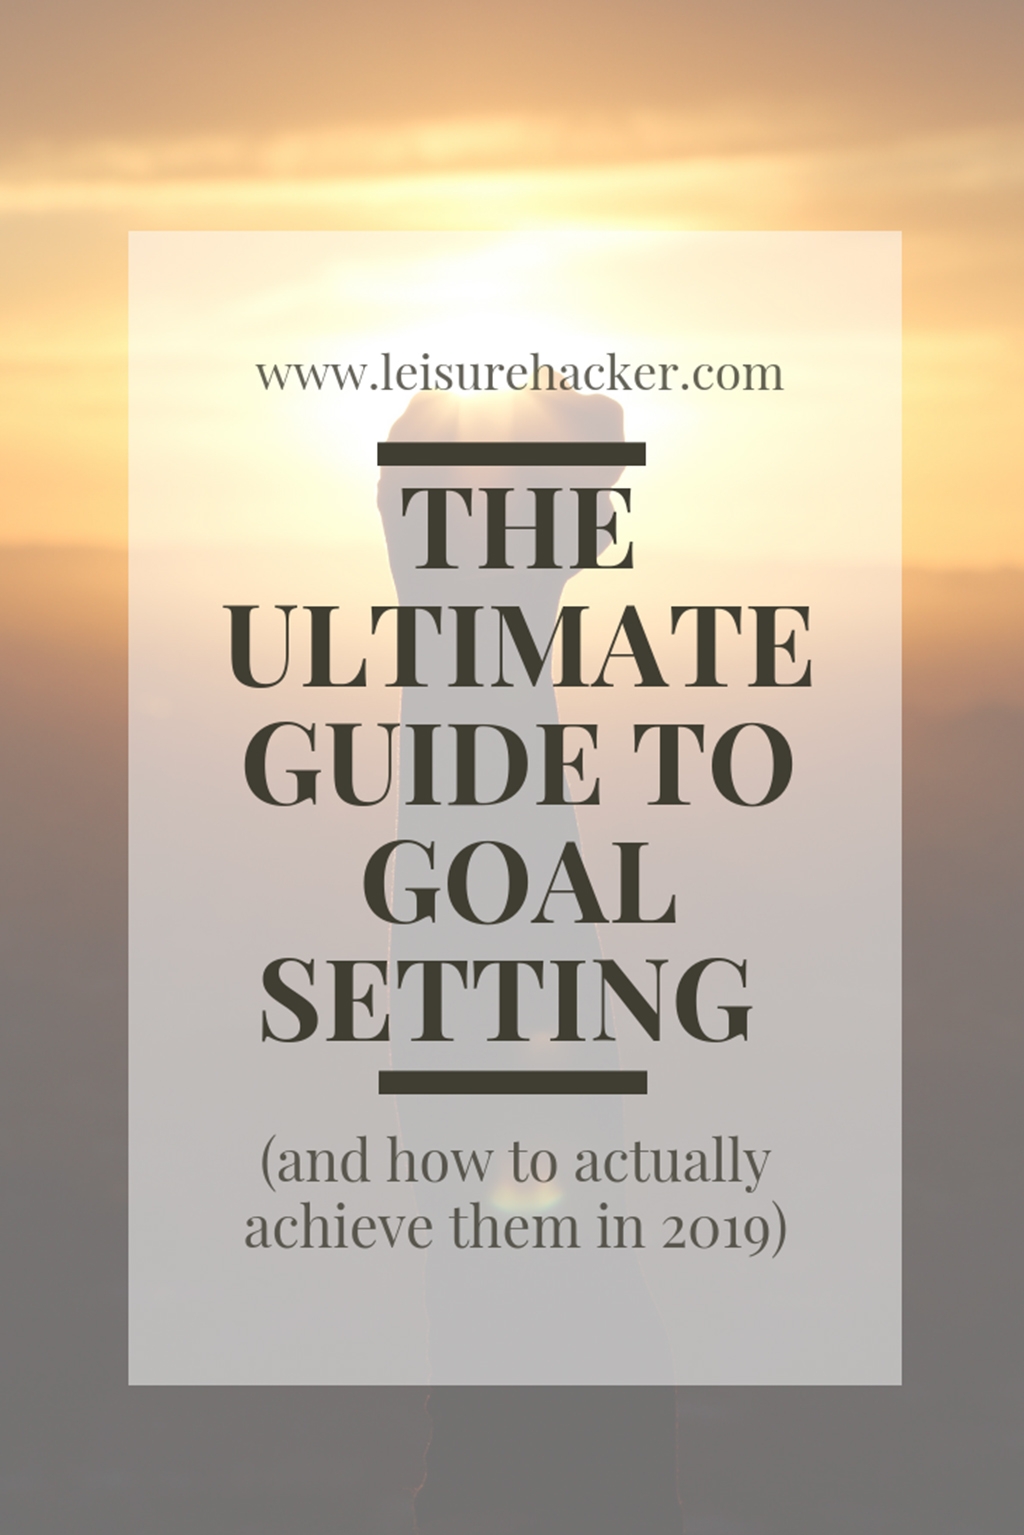 The ultimate guide to goal setting (and how to actually achieve them in 2019)